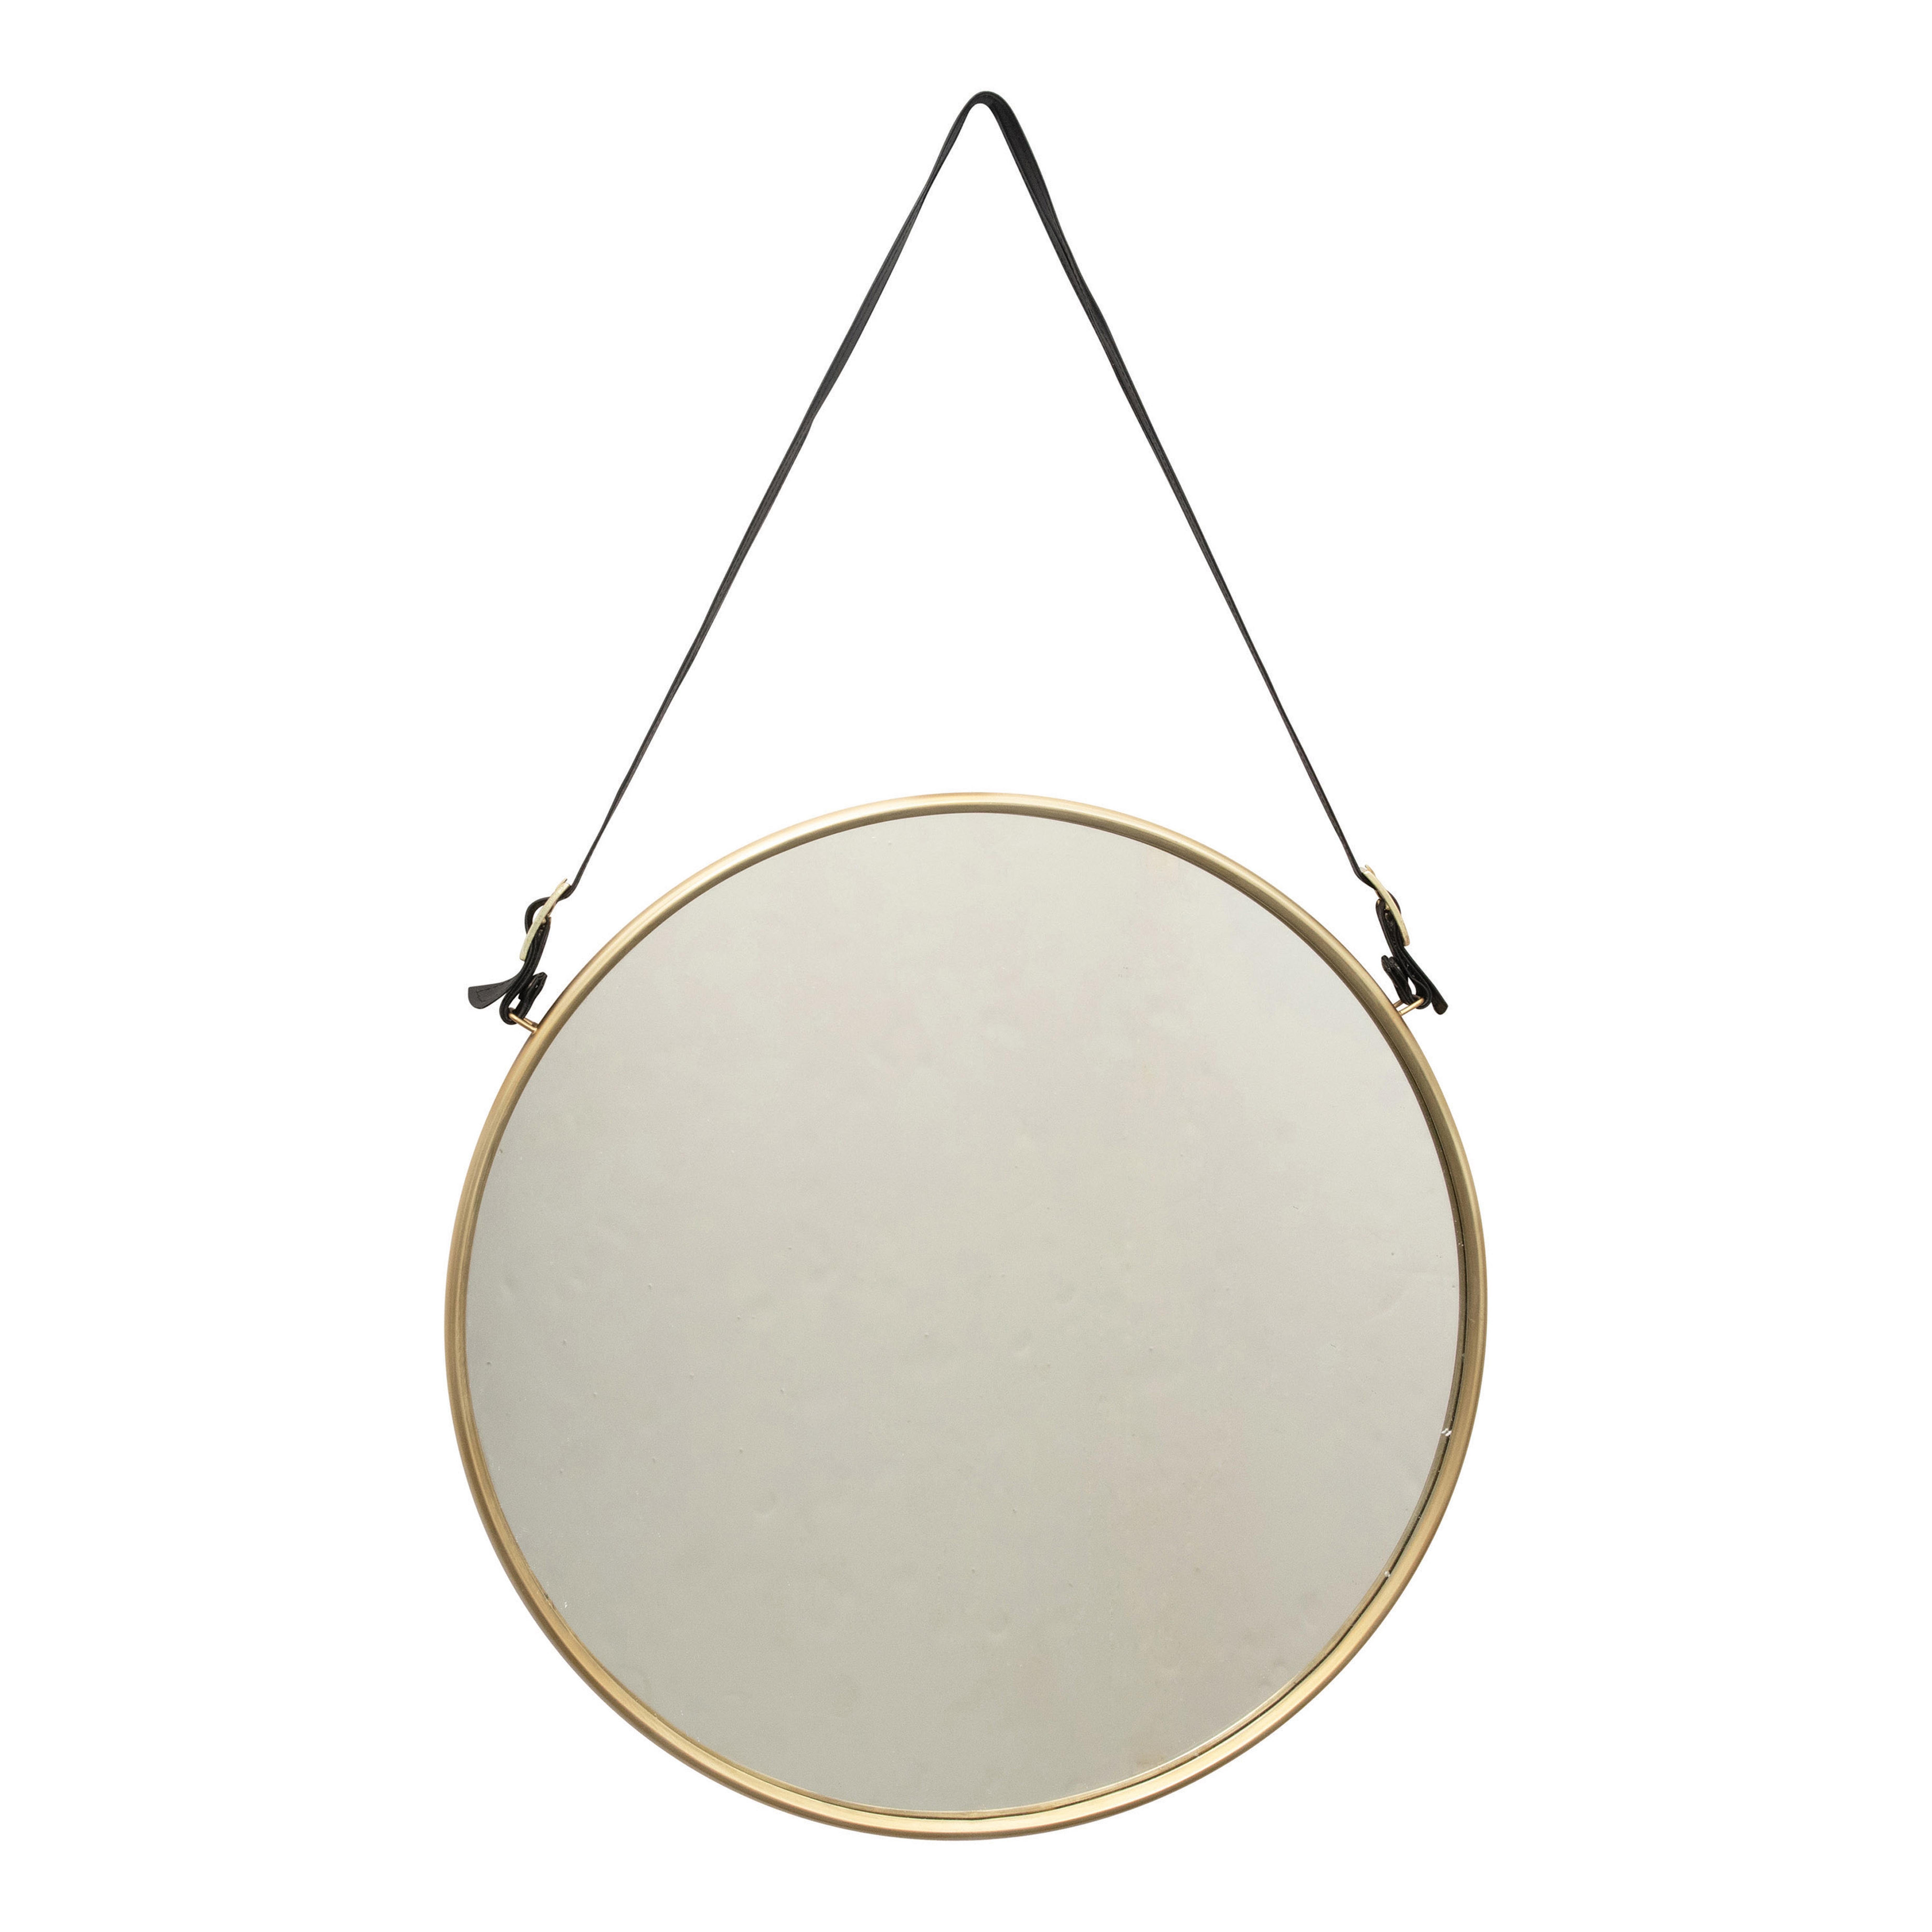 Round Metal & MDF Hanging Wall Mirror with Buckle Strap, Brushed Brass Finish - Creative Co-Op